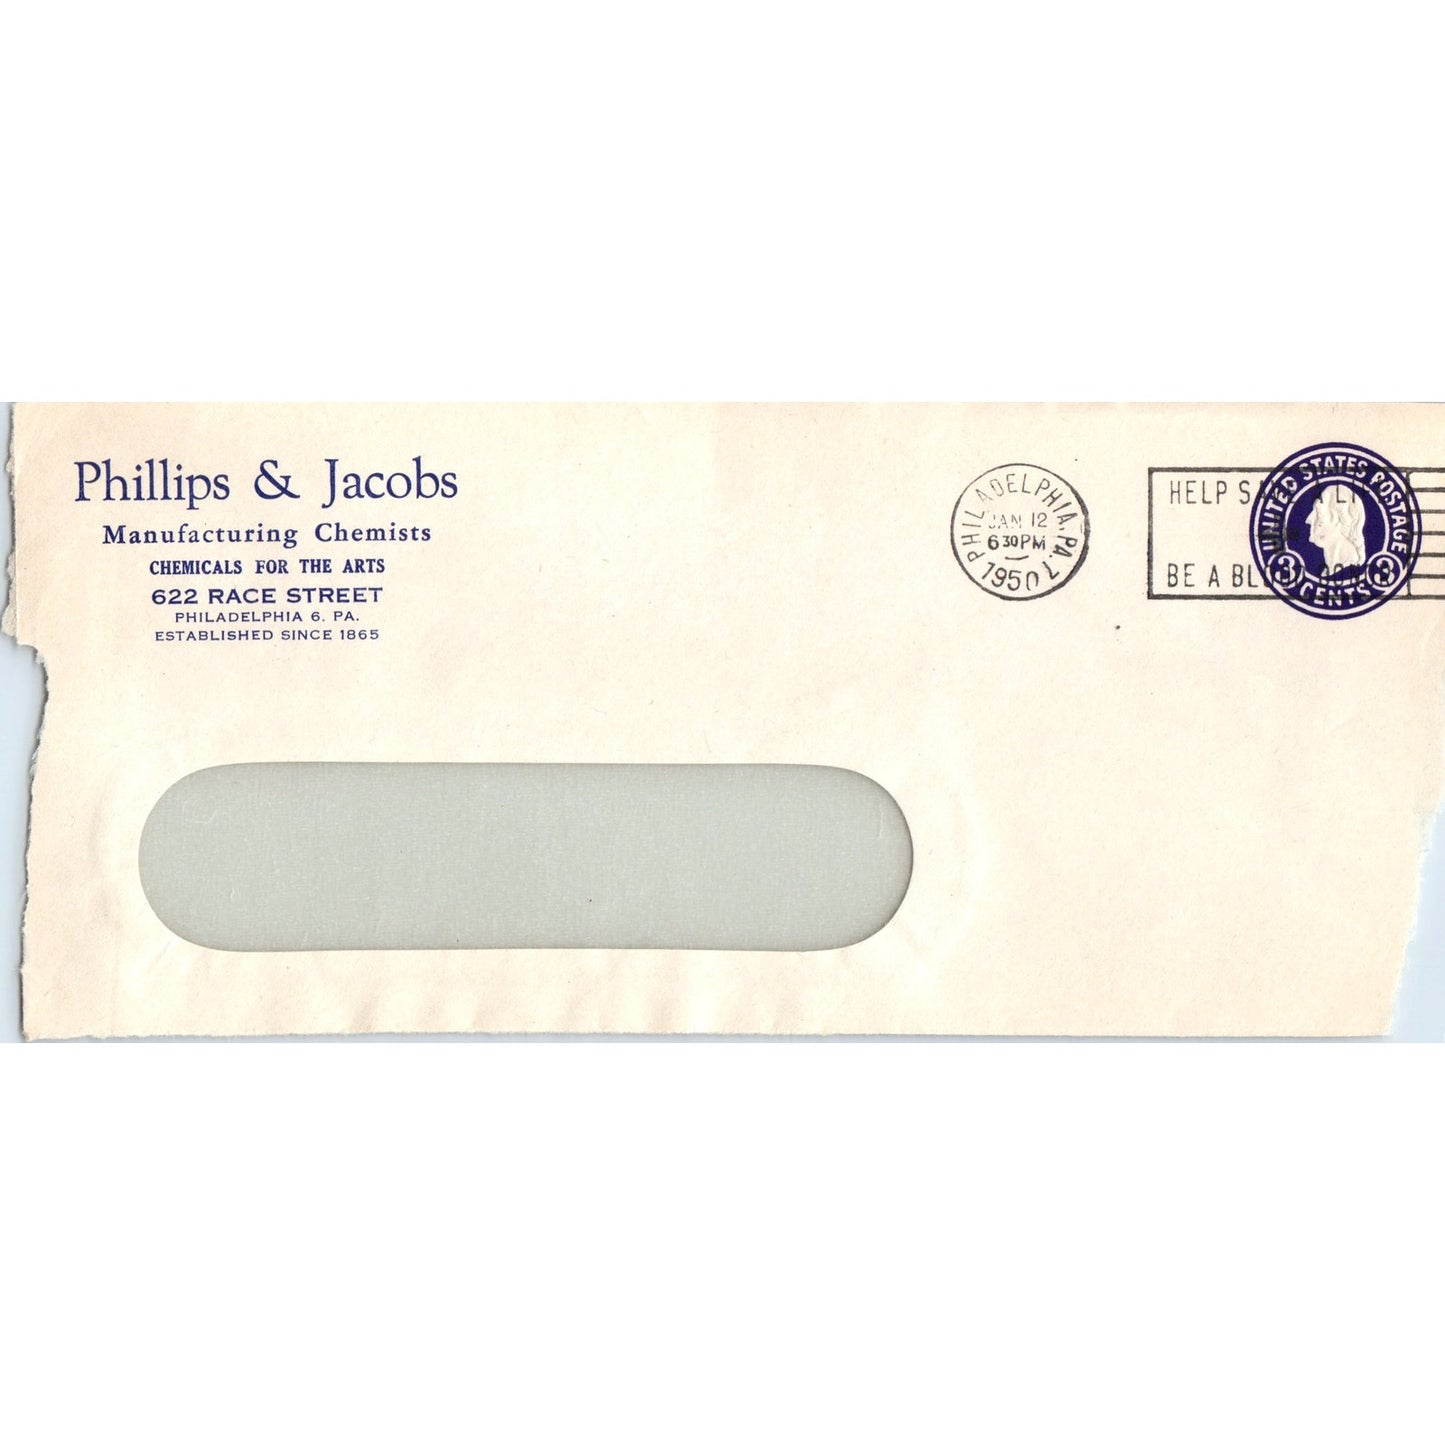 1950 Phillips & Jacobs Manufacturing Chemists Philadelphia Postal Cover TH9-L2